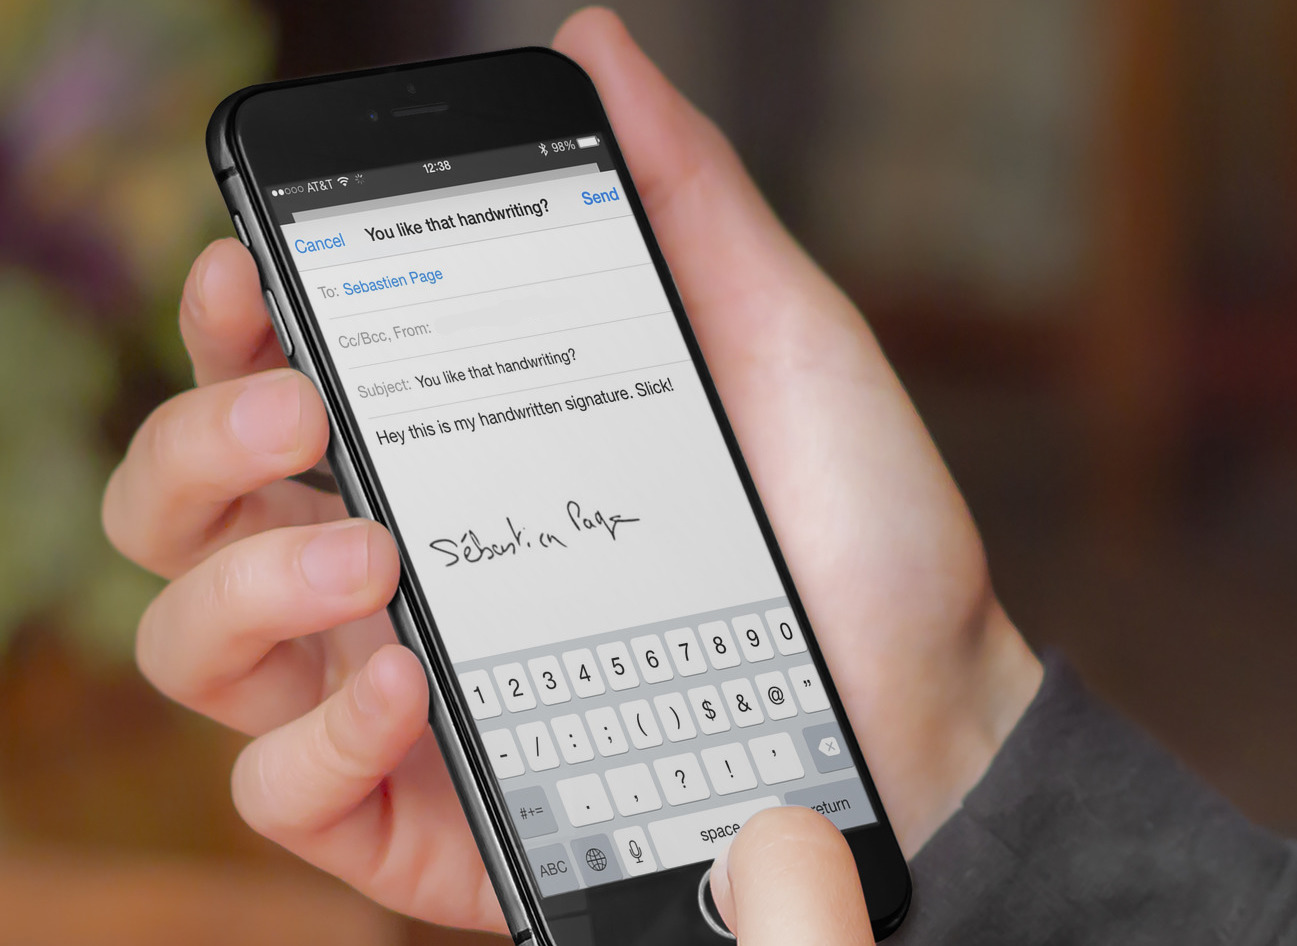 How To Make An Electronic Signature On IPhone